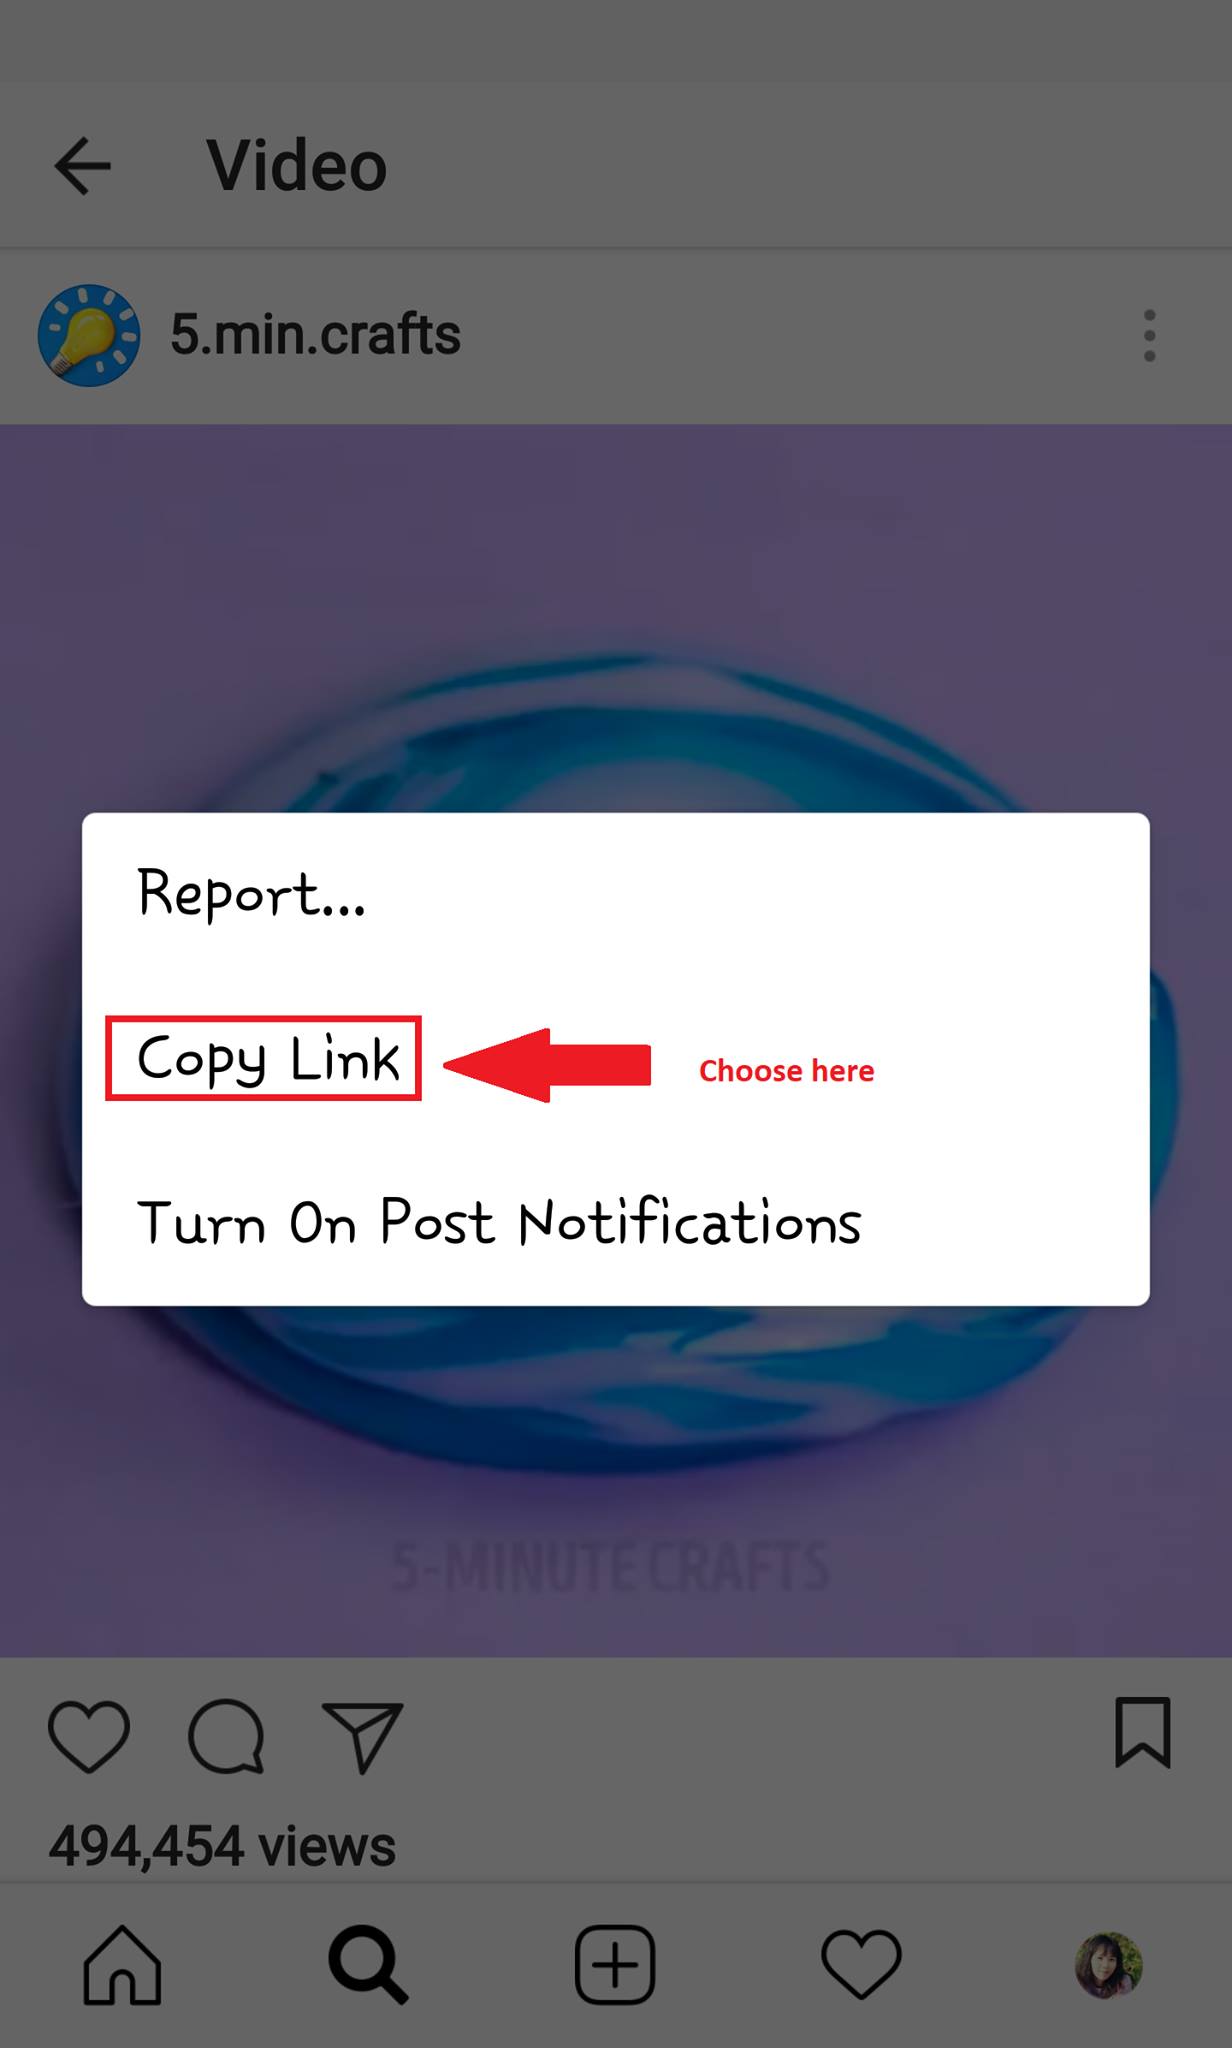 Heard Of The Nice Instagram Downloader BS Concept? Here Is A Great Example